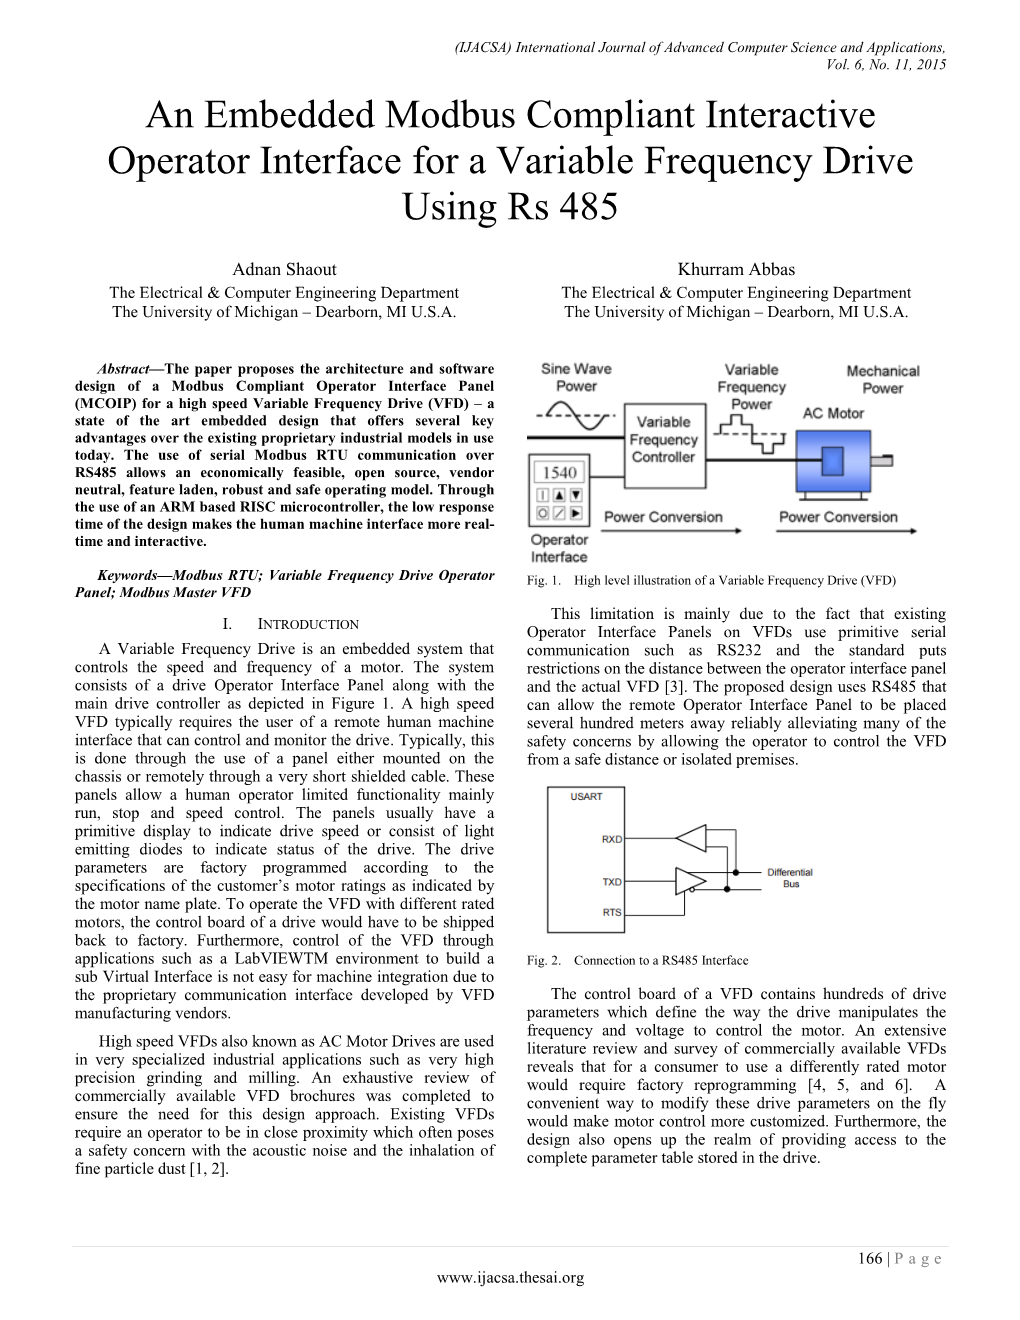 An Embedded Modbus Compliant Interactive Operator Interface for a Variable Frequency Drive Using Rs 485